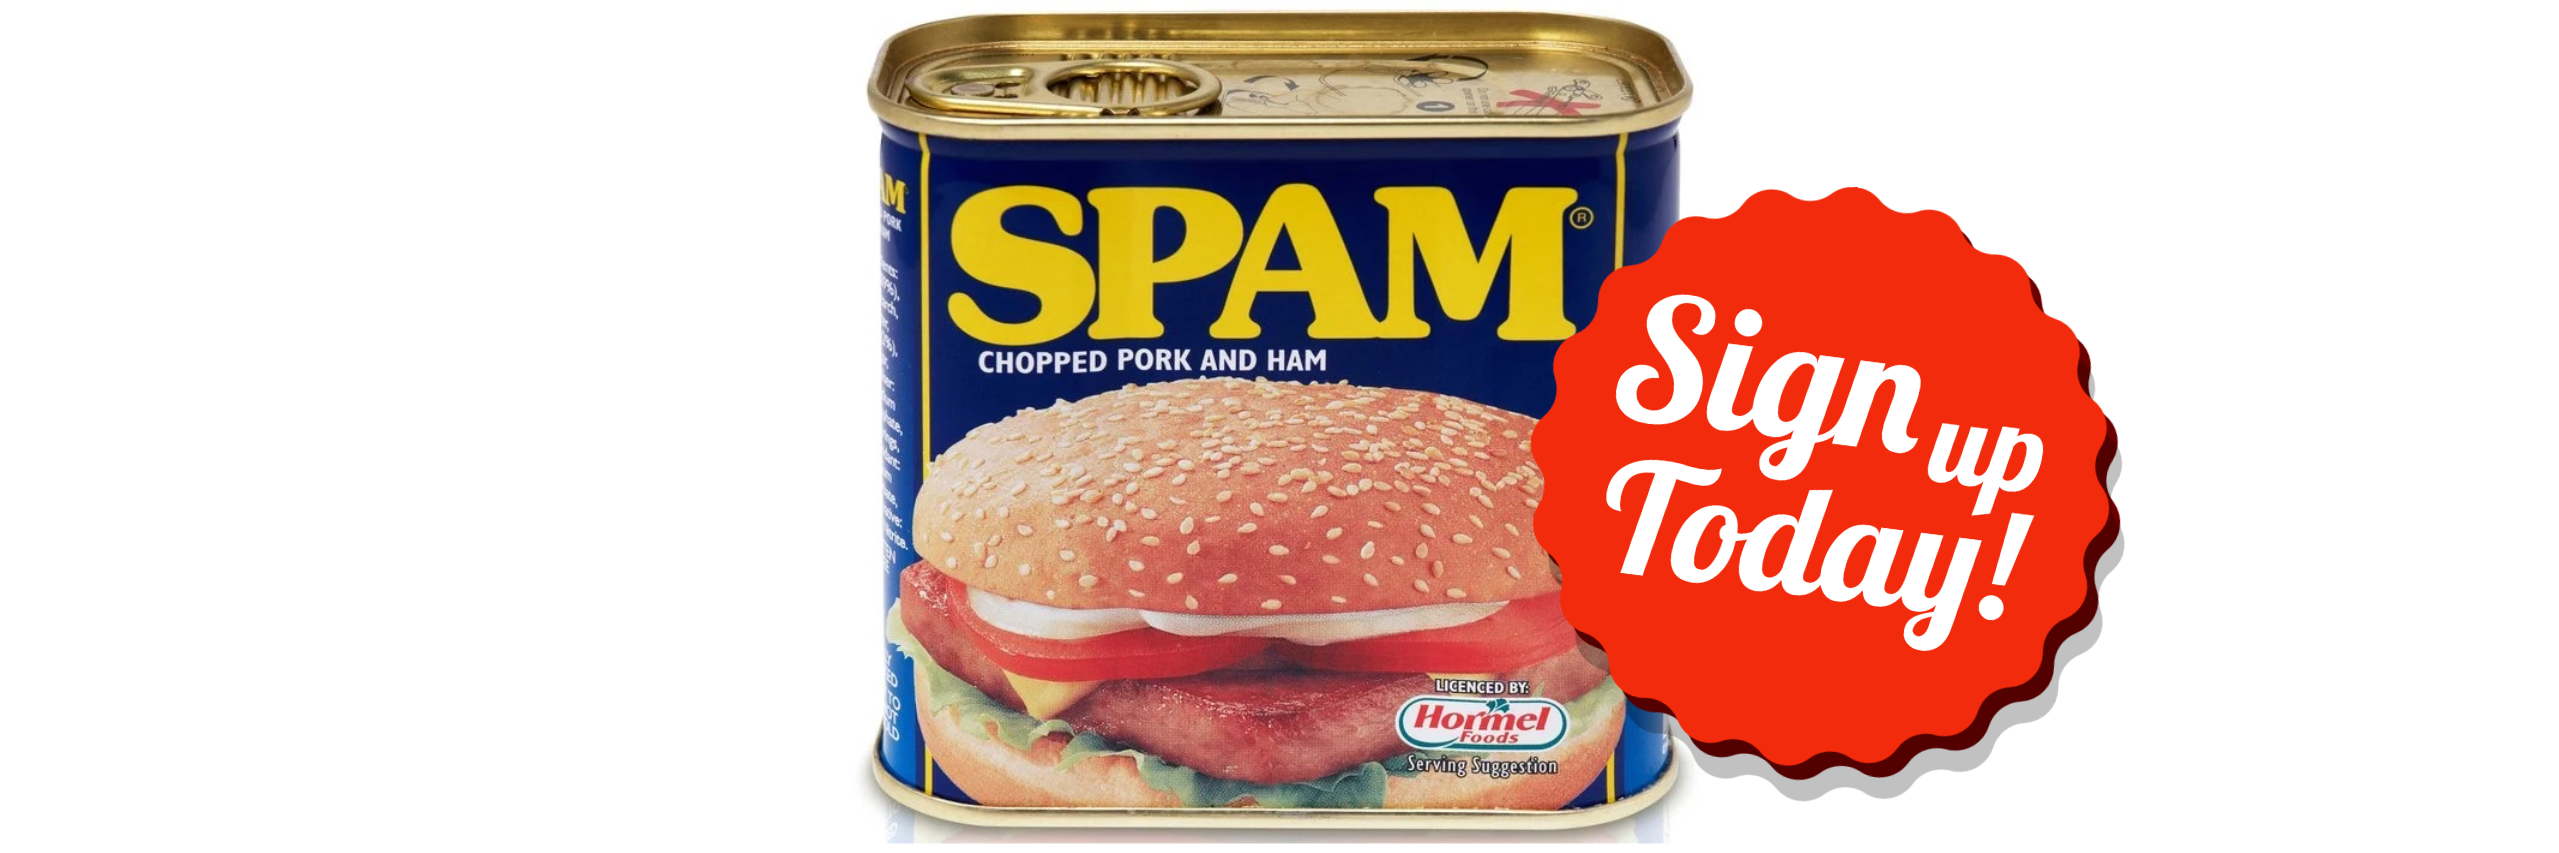 spam-2.png